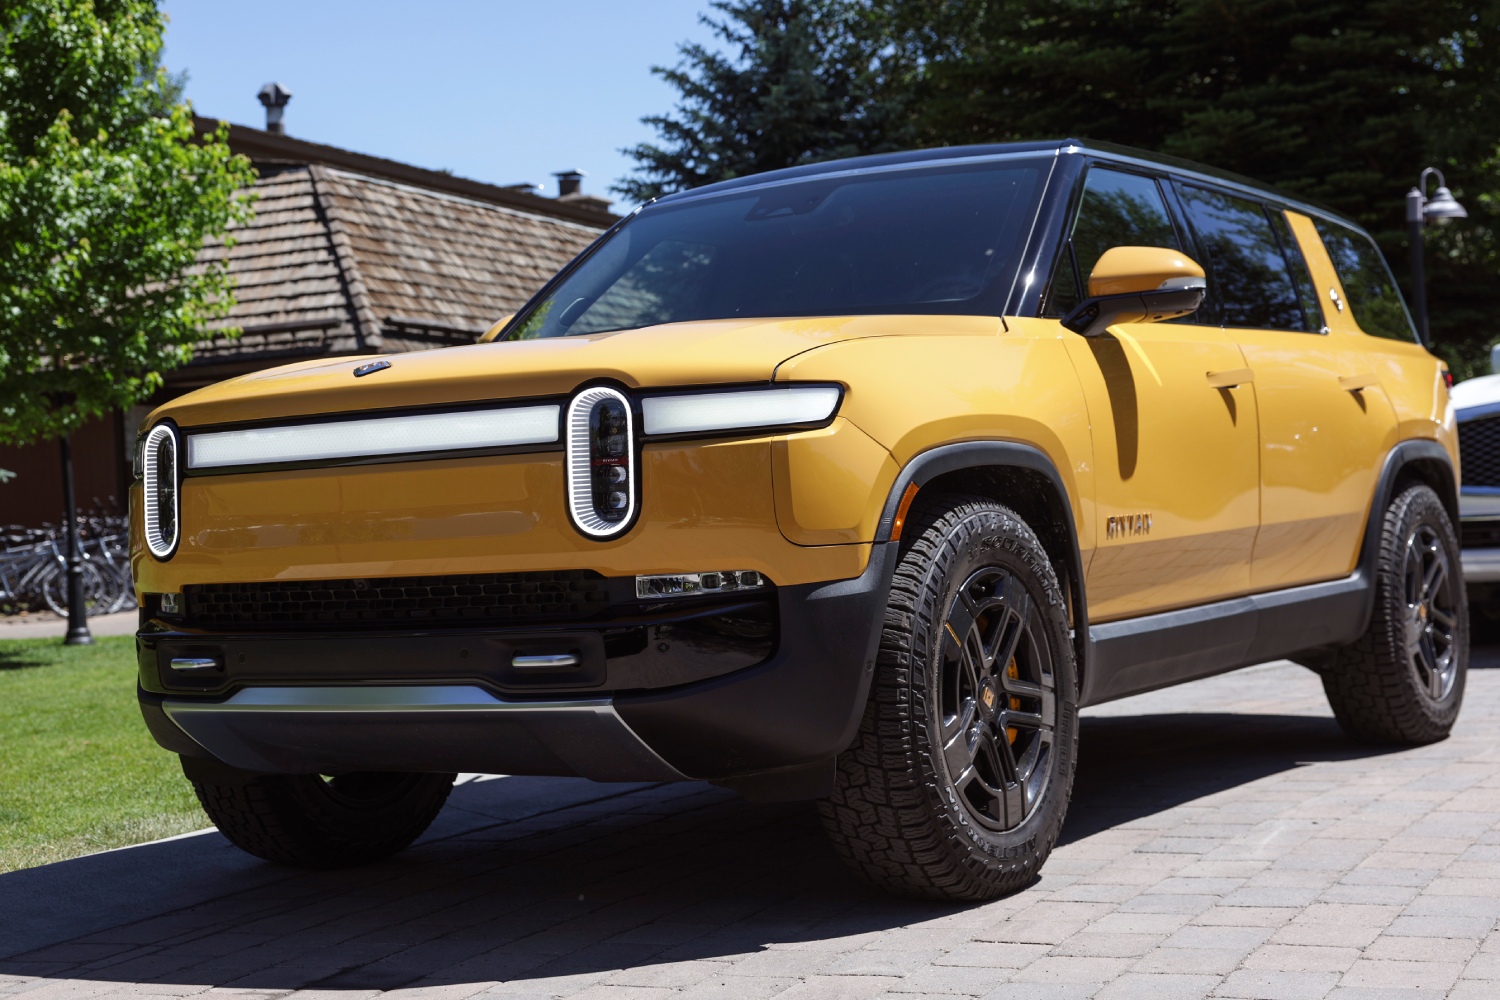 This Rivian R1S is one of the quickest luxury SUVs for 2023